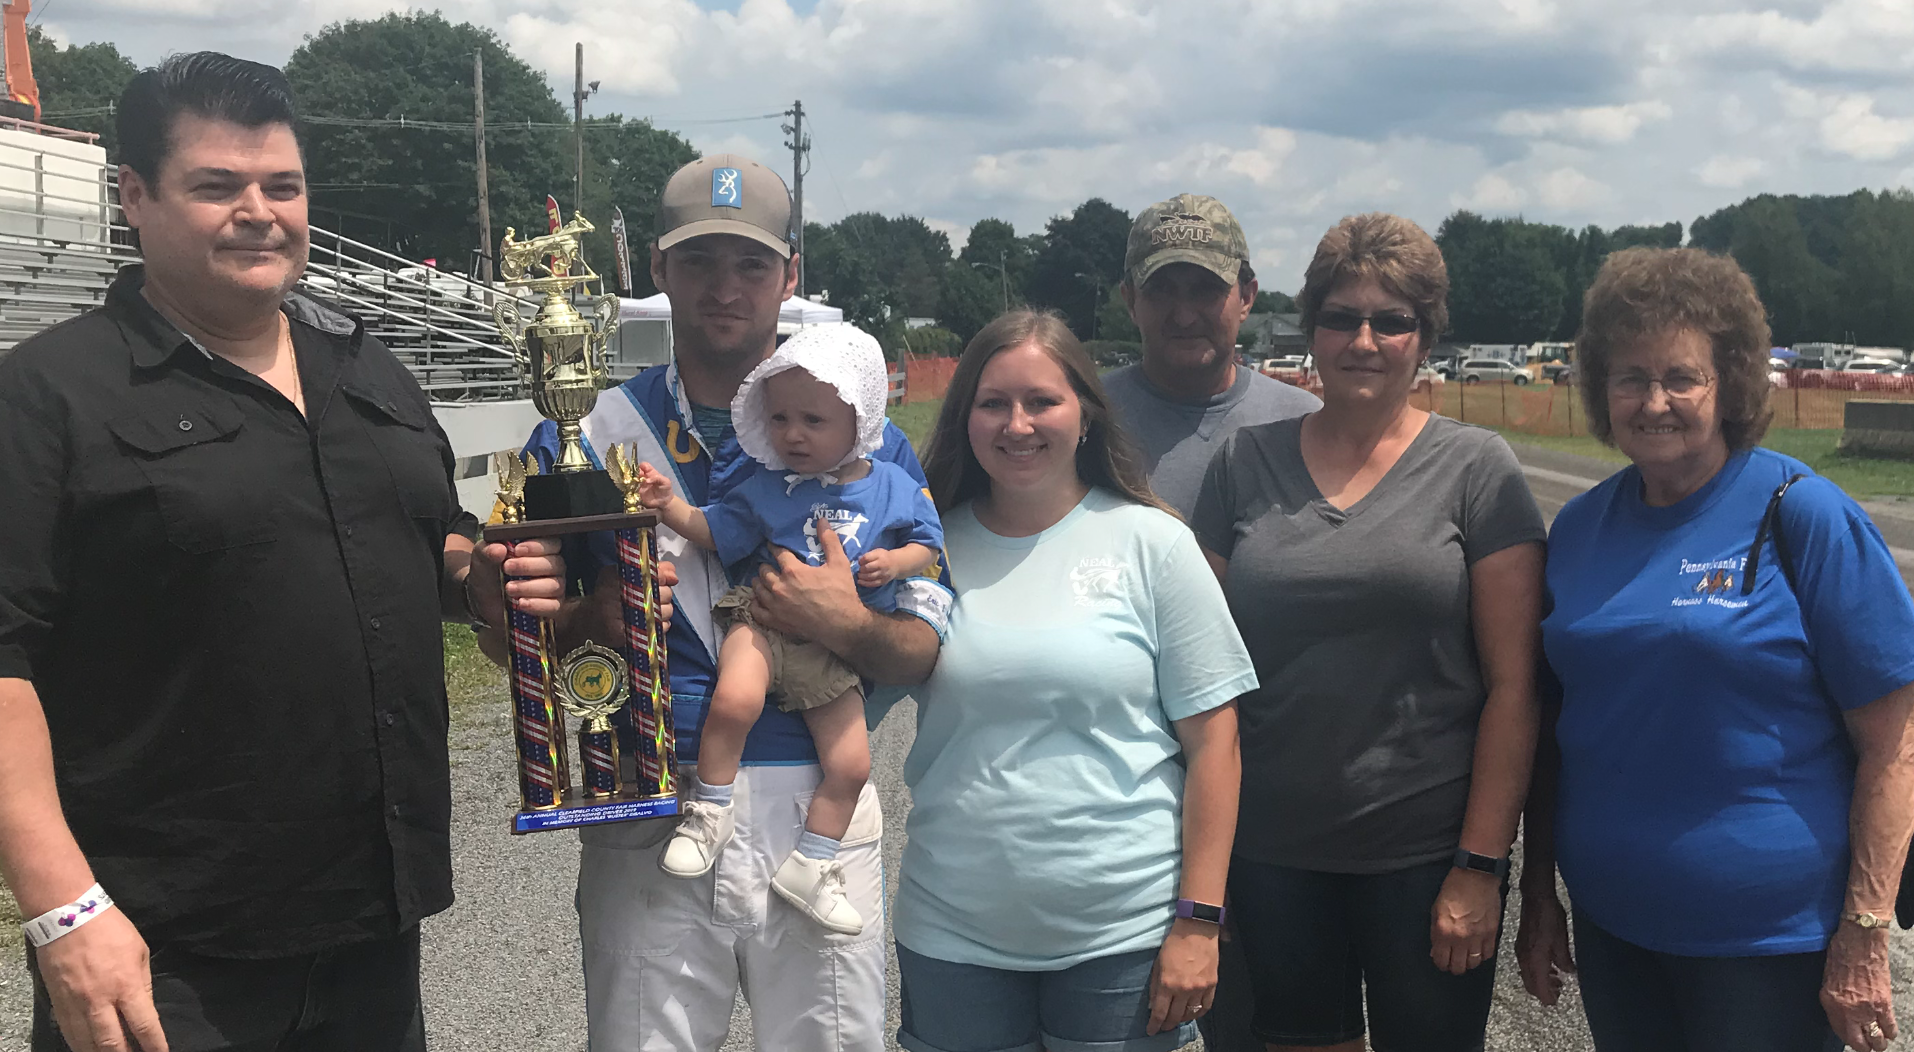 FIRST-TIME WINNER Eric Neal of Punxsutawney accepts the Charles "Buster" DiSalvo Trophy for the most wins in the Clearfield County Fair harness racing meet from John Spingola while holding 10-month-old daughter Hazel. Neal is flanked by Holly Waltman, his fiancé, father Randy Neal, mother Suzie Neal and grandmother Donna Neal. (Photo by Sue Kavelak)